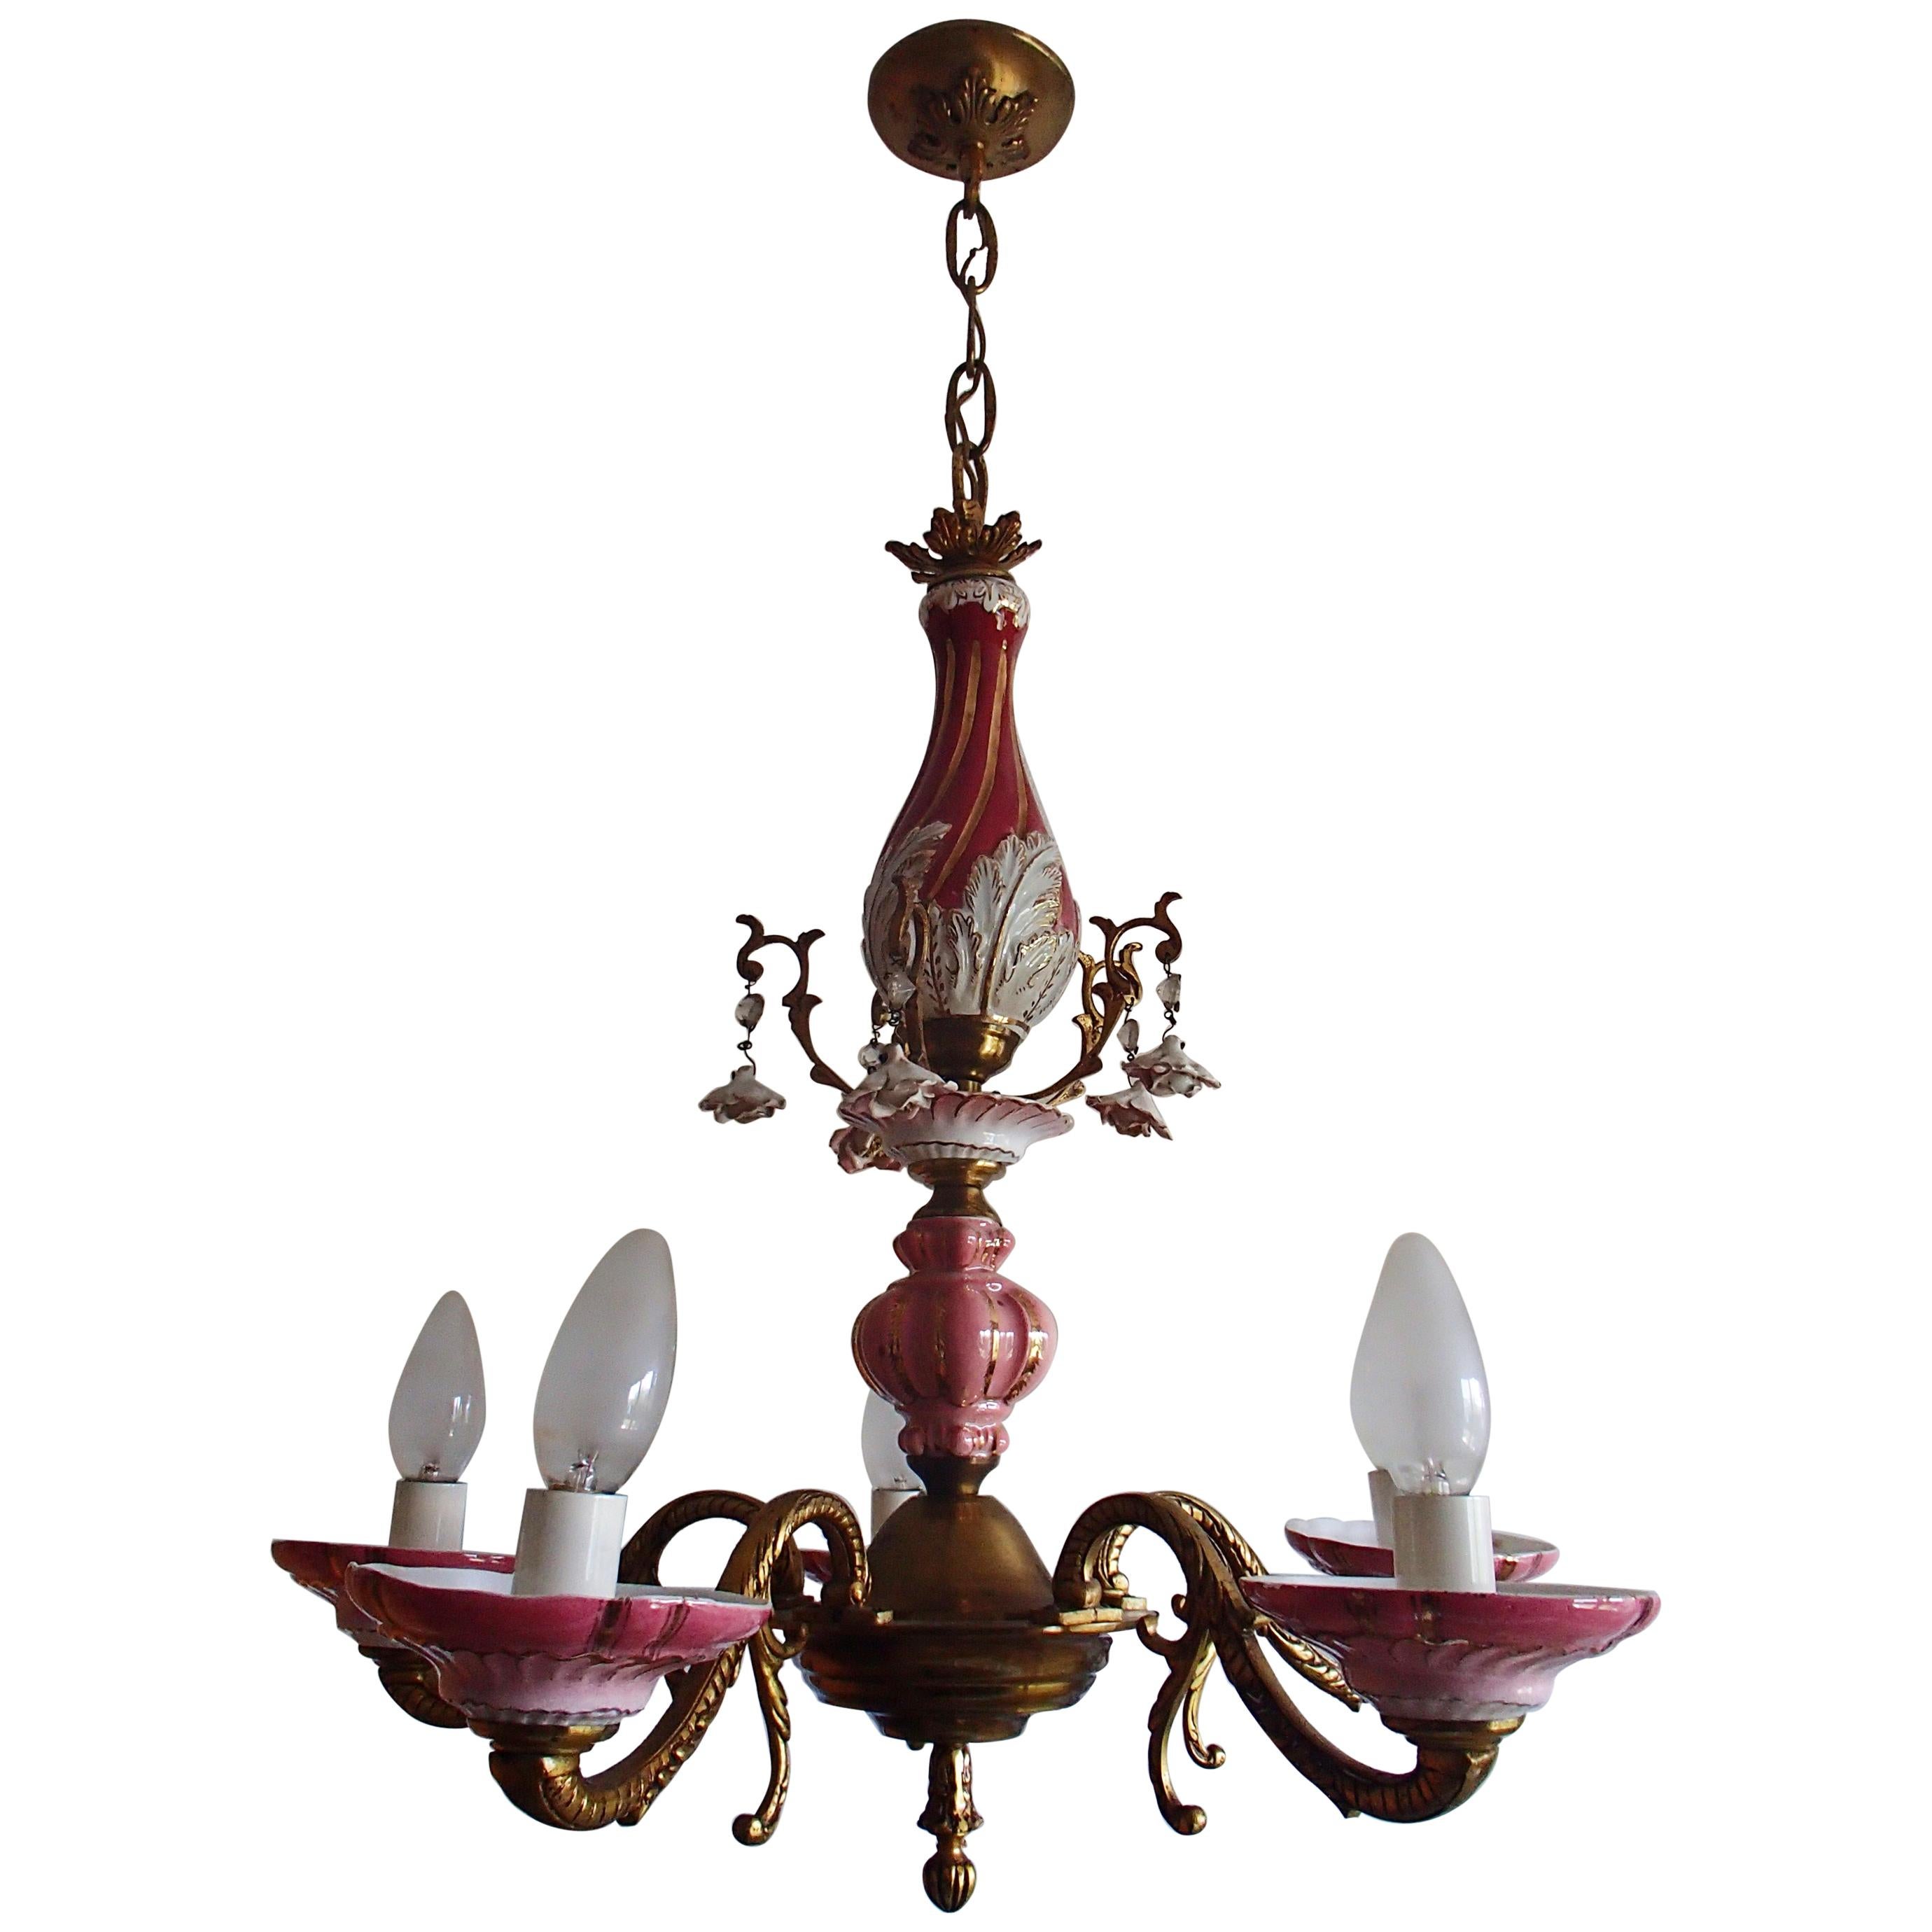 1960th Italian Porcelain Chandelier with Roses